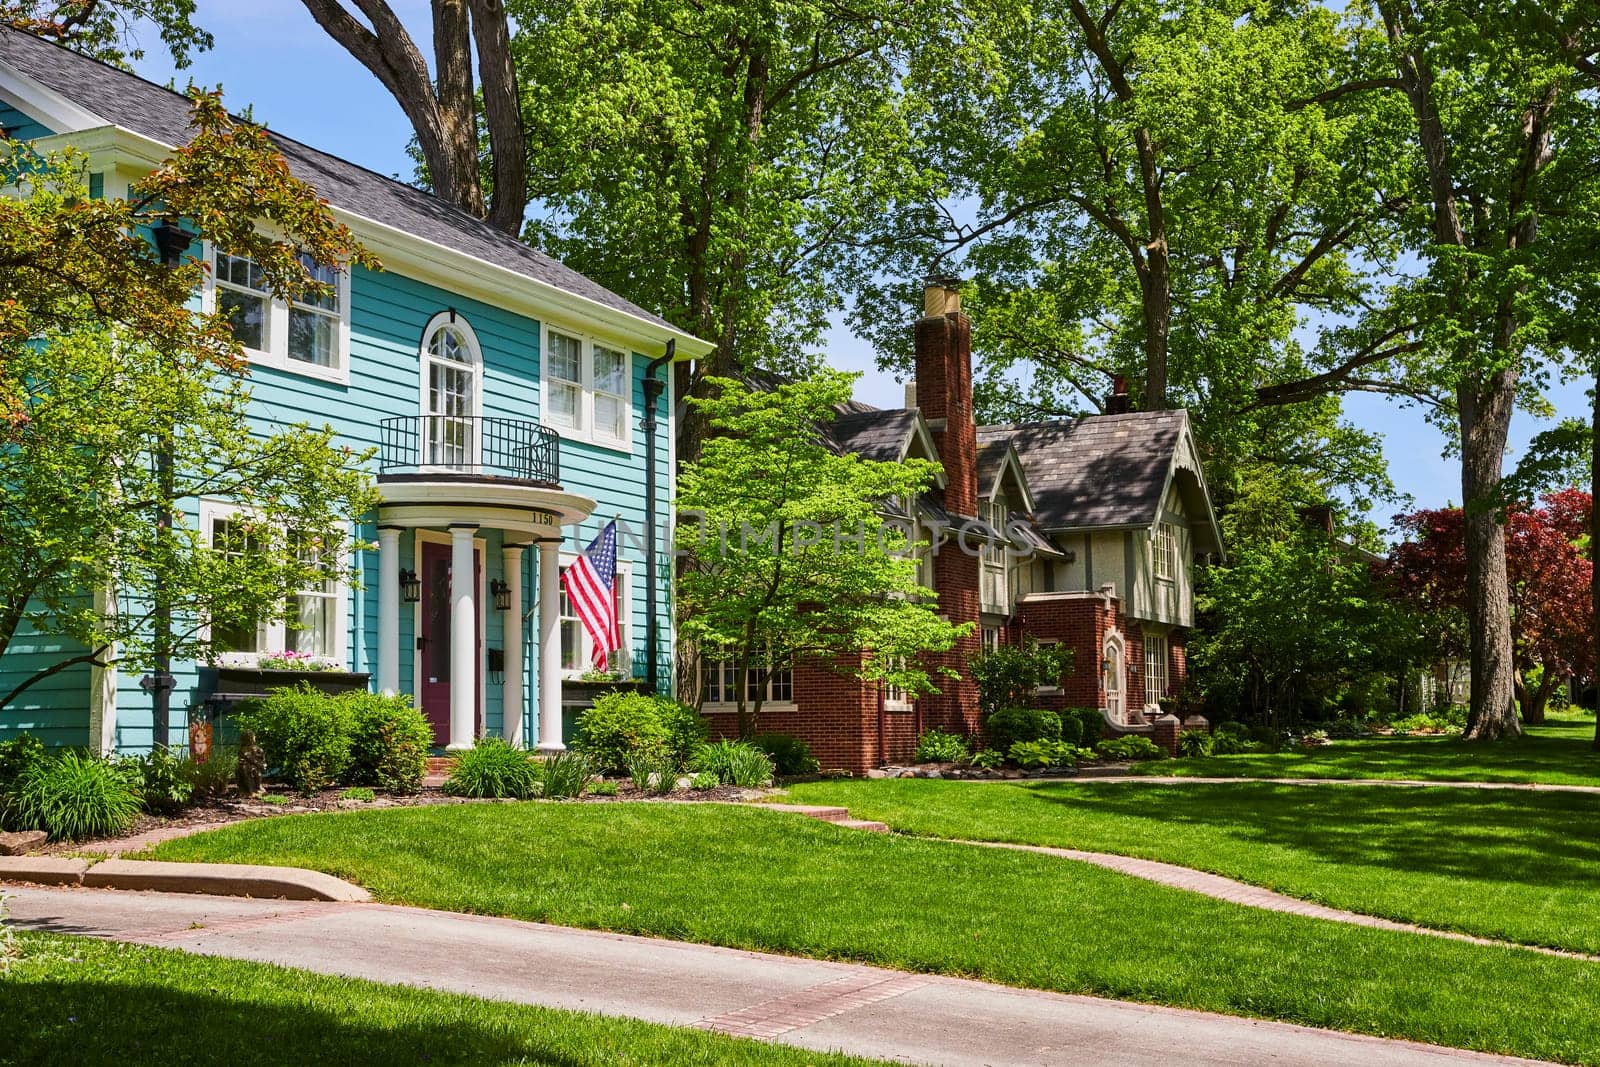 Idyllic suburban street in Fort Wayne, vibrant turquoise home with American flag, and lush greenery.